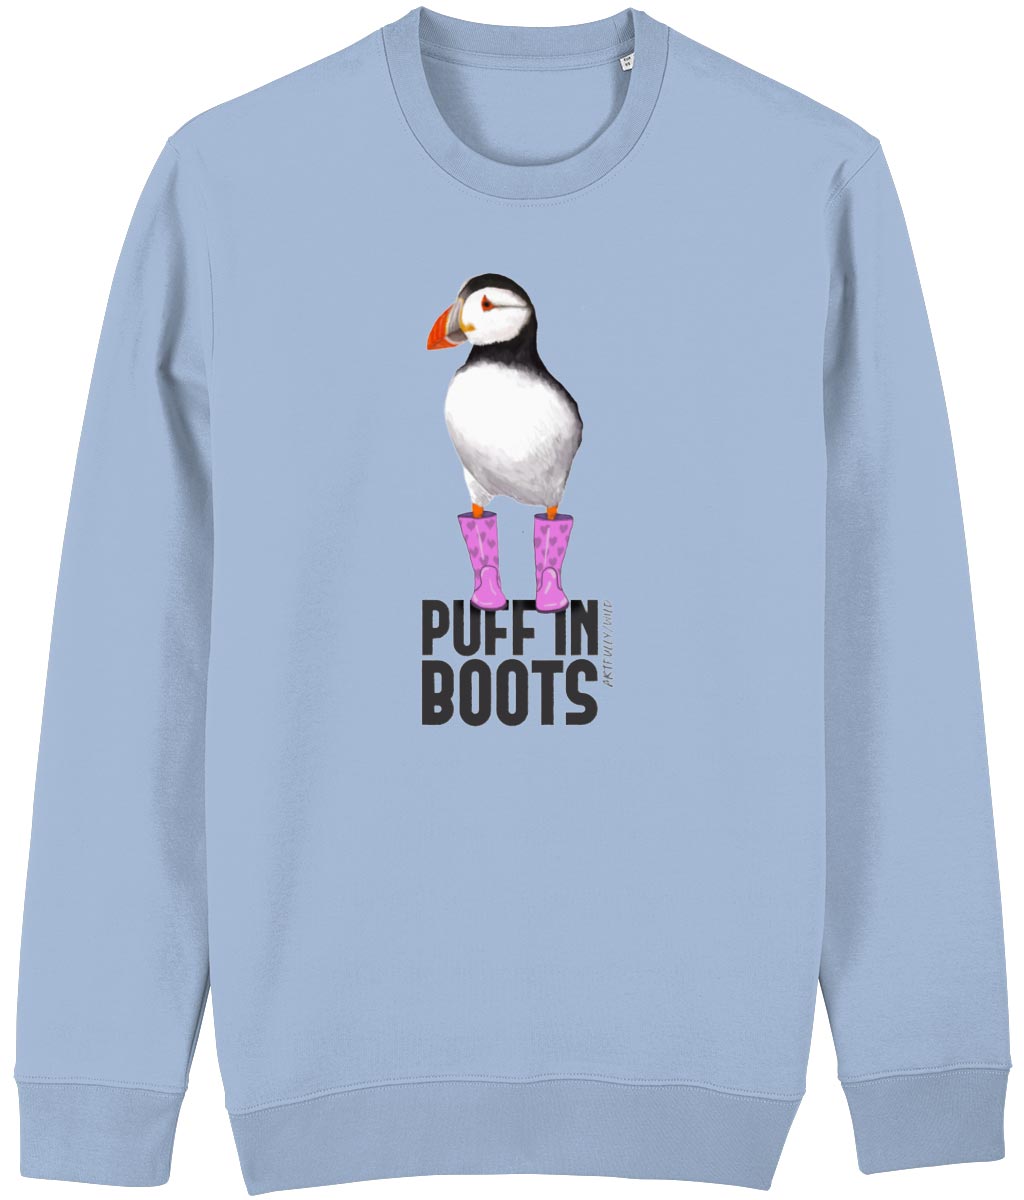 PUFF IN PINK BOOTS Organic Cotton Unisex Sky Blue Crew Neck Sweatshirt. Printed with eco-friendly water-based Inks. Original Design by Artfully Wild.